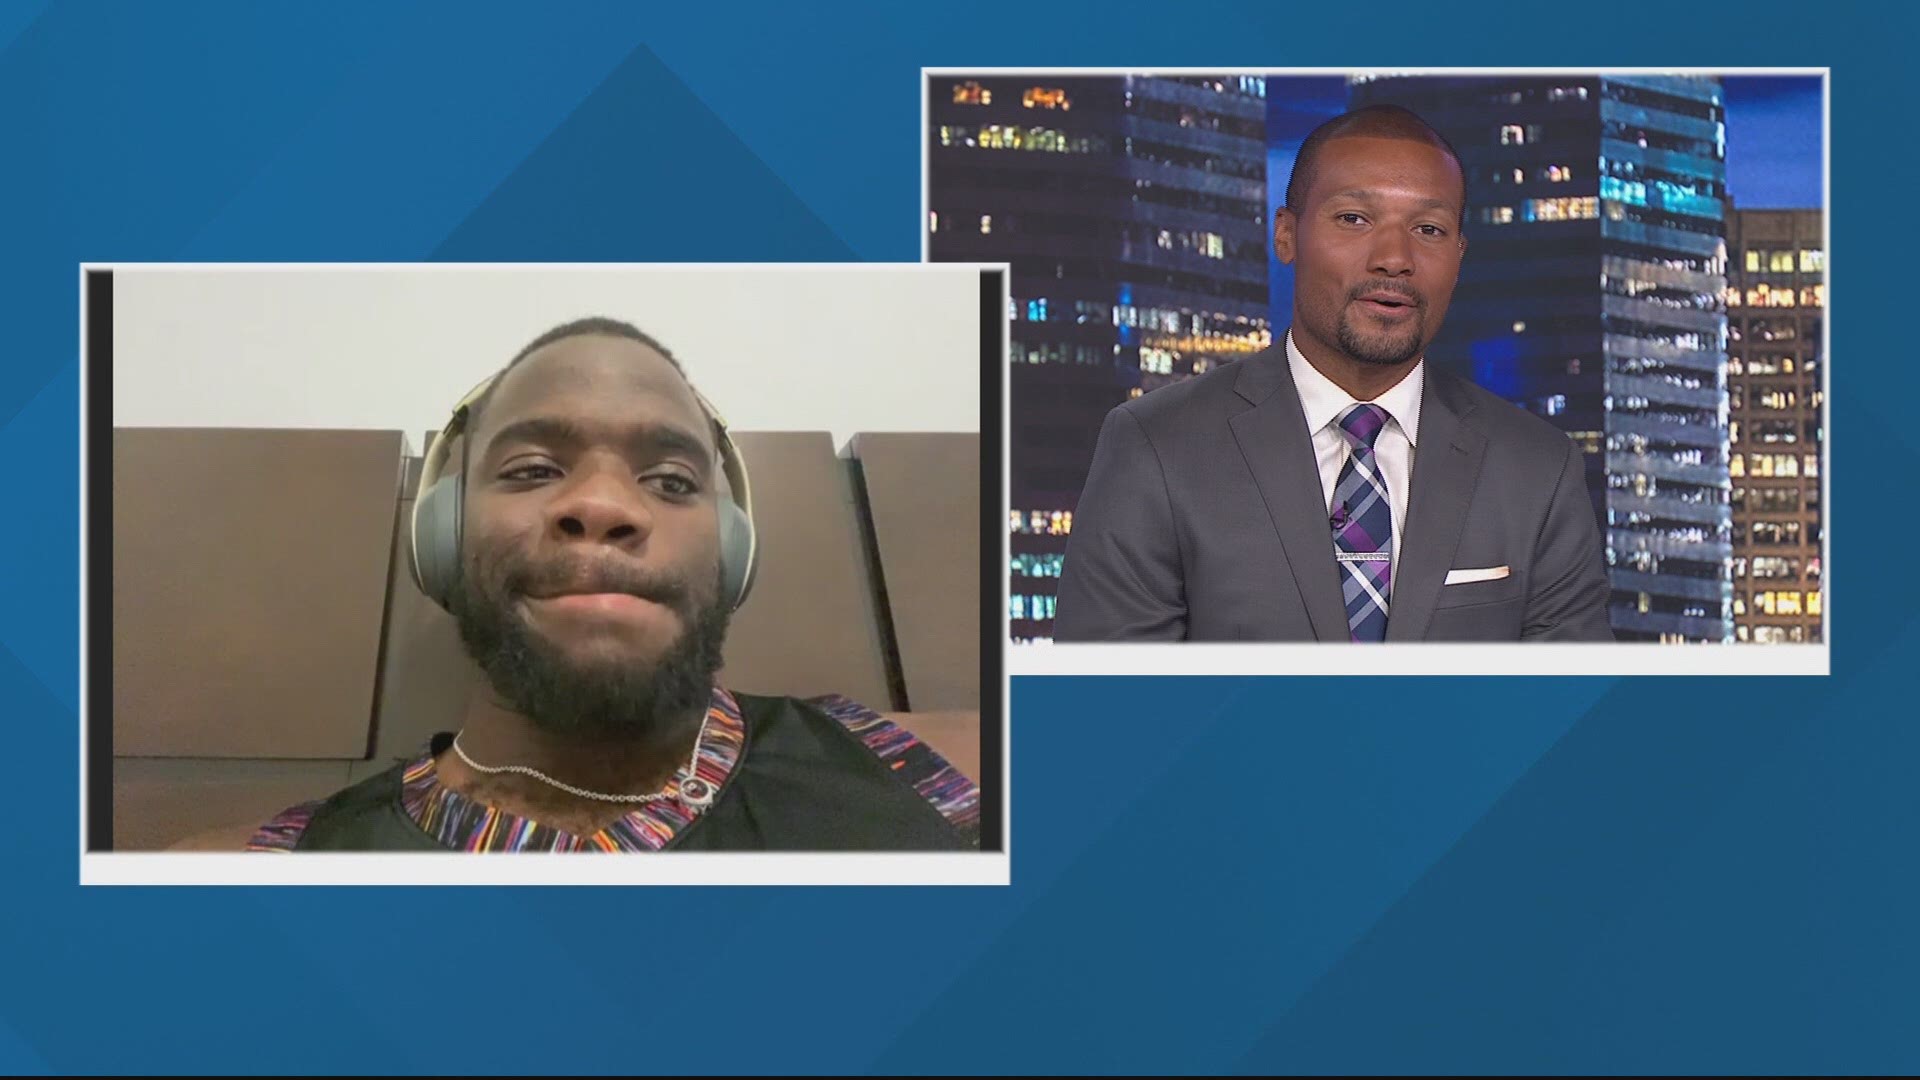 Maryland native Frances Tiafoe heads to the Olympics for the first time. He shares his thoughts on a dream come true in an interview with WUSA9's Darren Hayes.